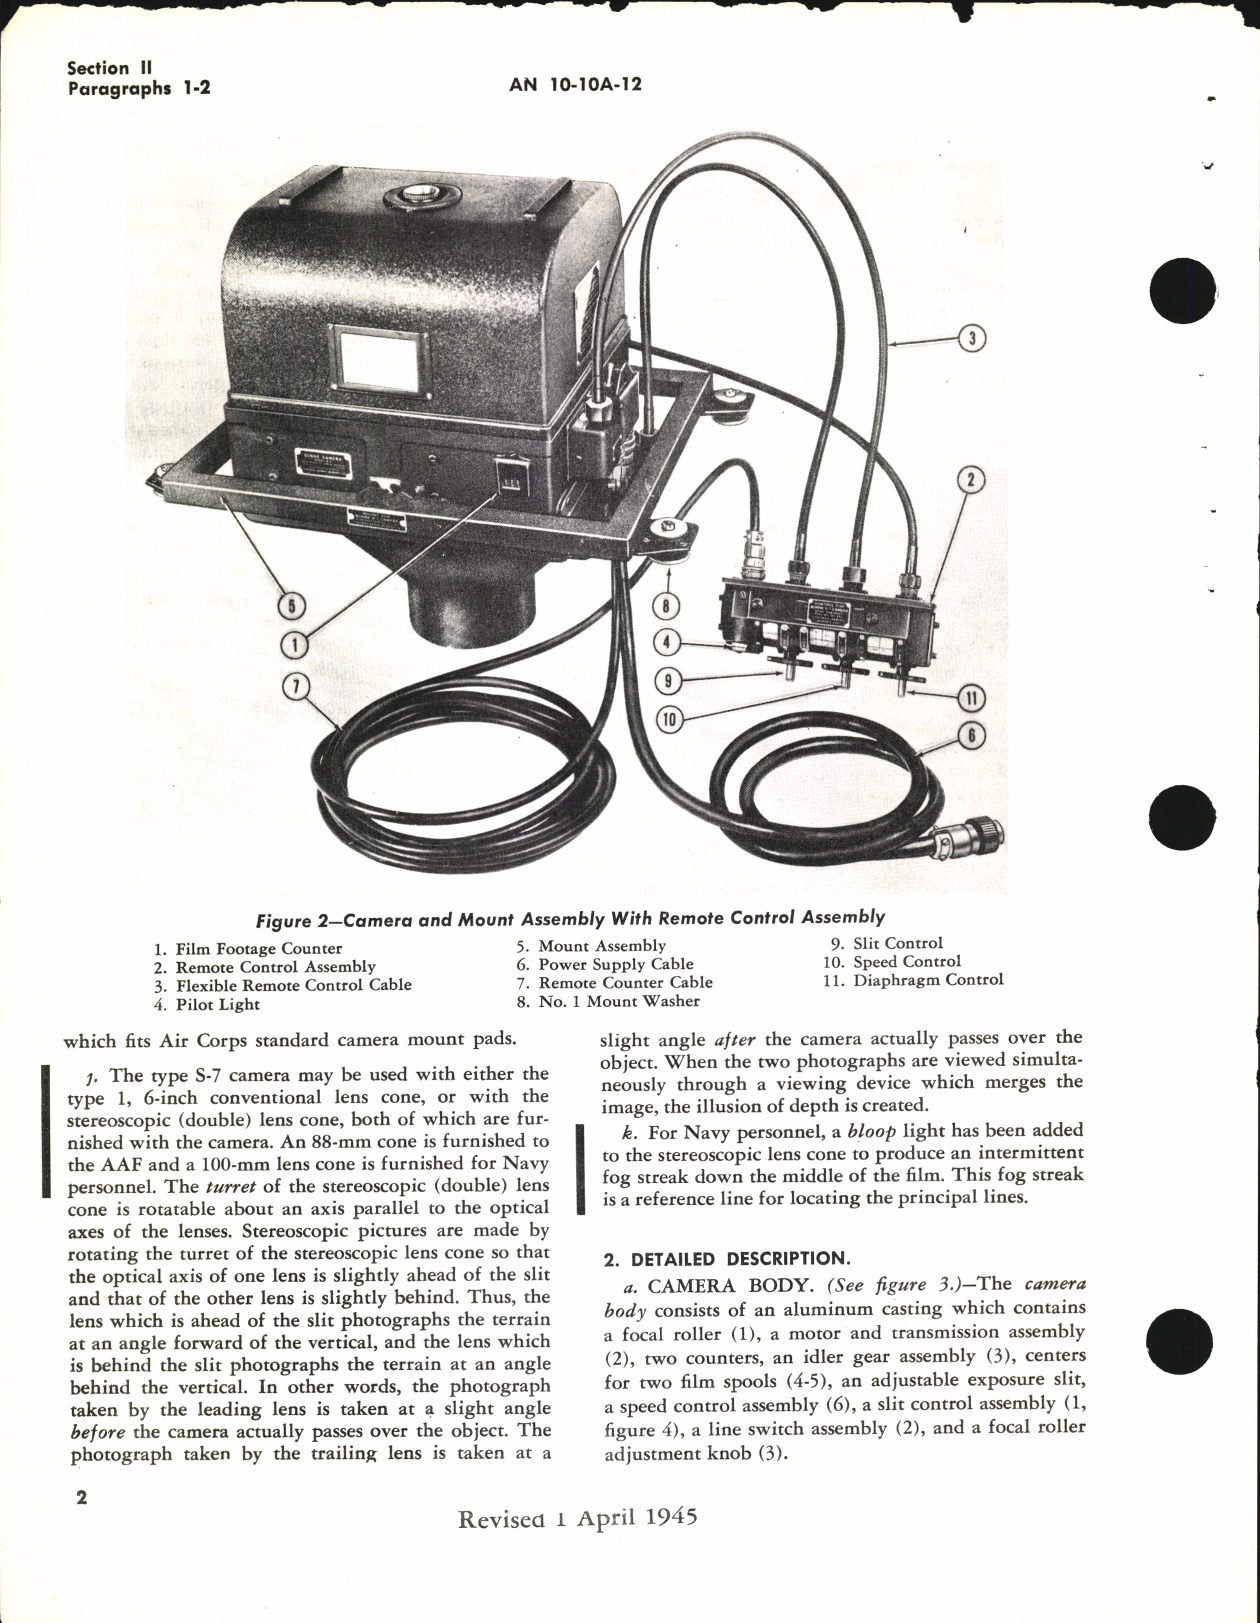 Sample page 6 from AirCorps Library document: Operation, Service, & Overhaul Instructions with Parts Catalog for Type S-7 Aircraft Camera